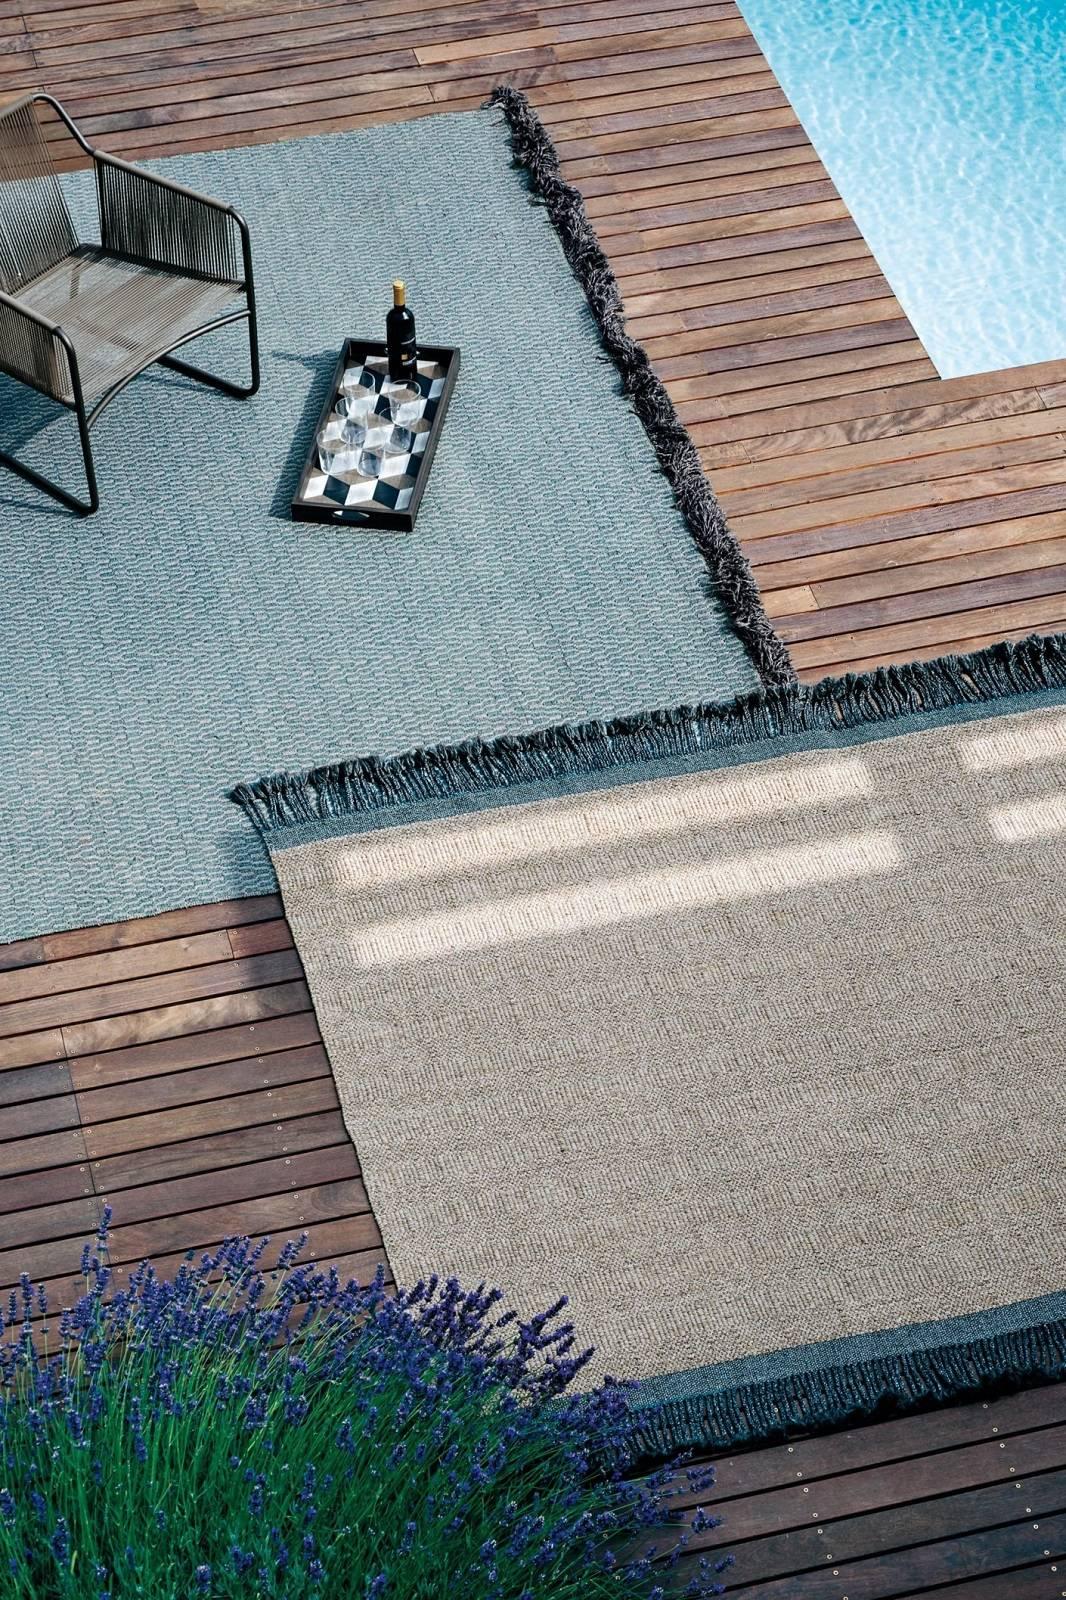 Atlas collection of outdoor rugs is defined by a contemporary taste, which combines understated refinement and a natural look.
Produced on hand looms from synthetic fibers in mélange nuances, Atlas rugs offer the highest outdoor performance, while